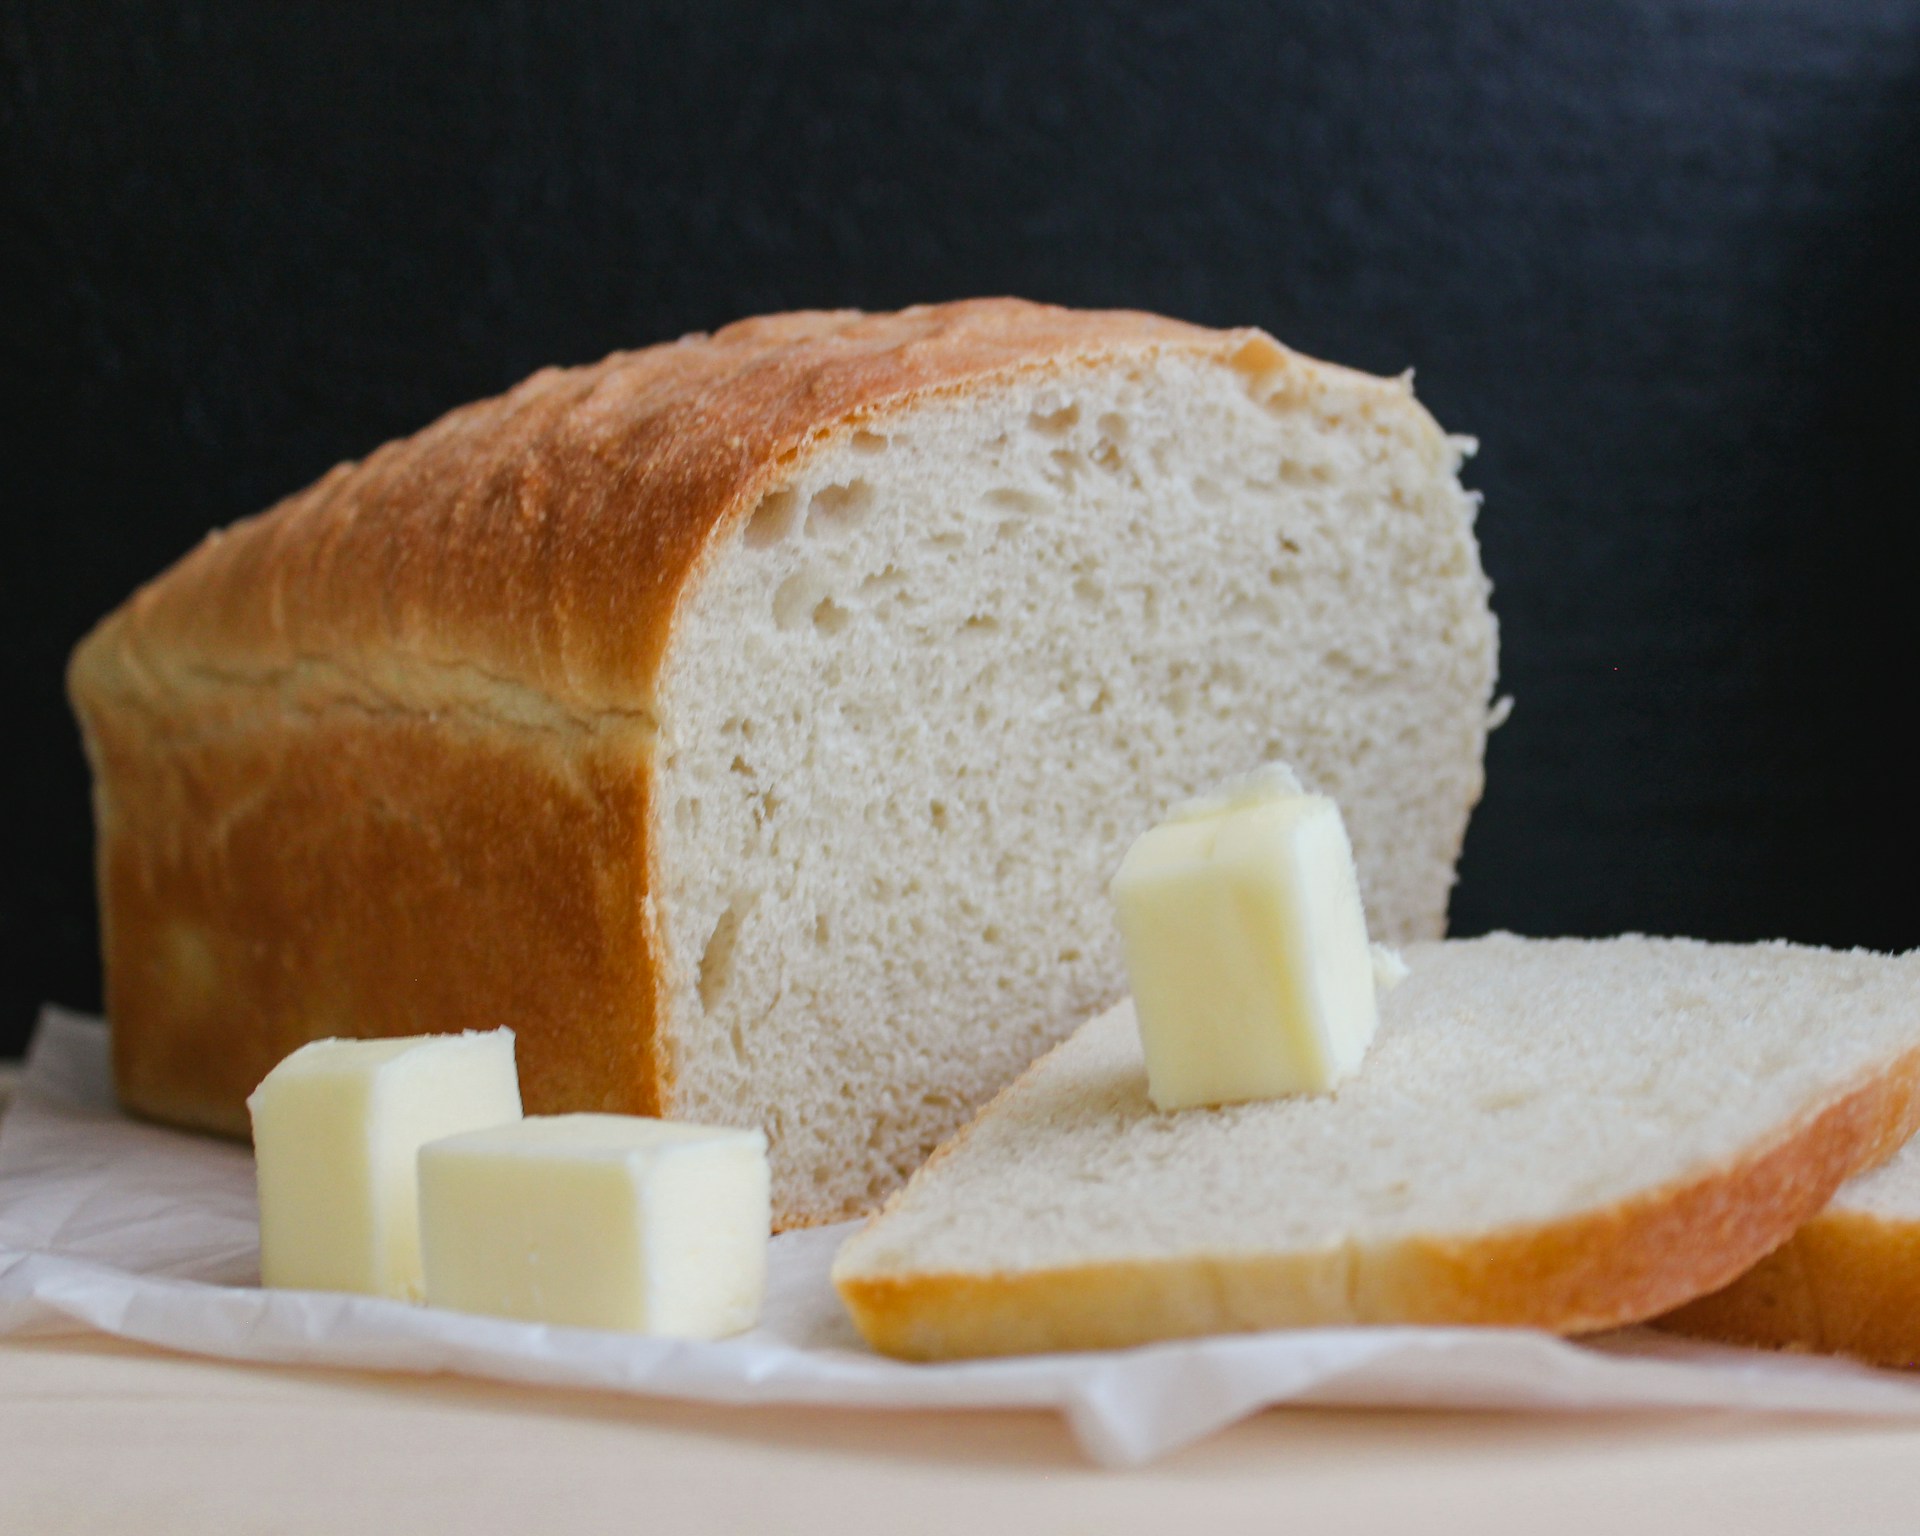 Bread and Butter Wallpaper 1920x1536